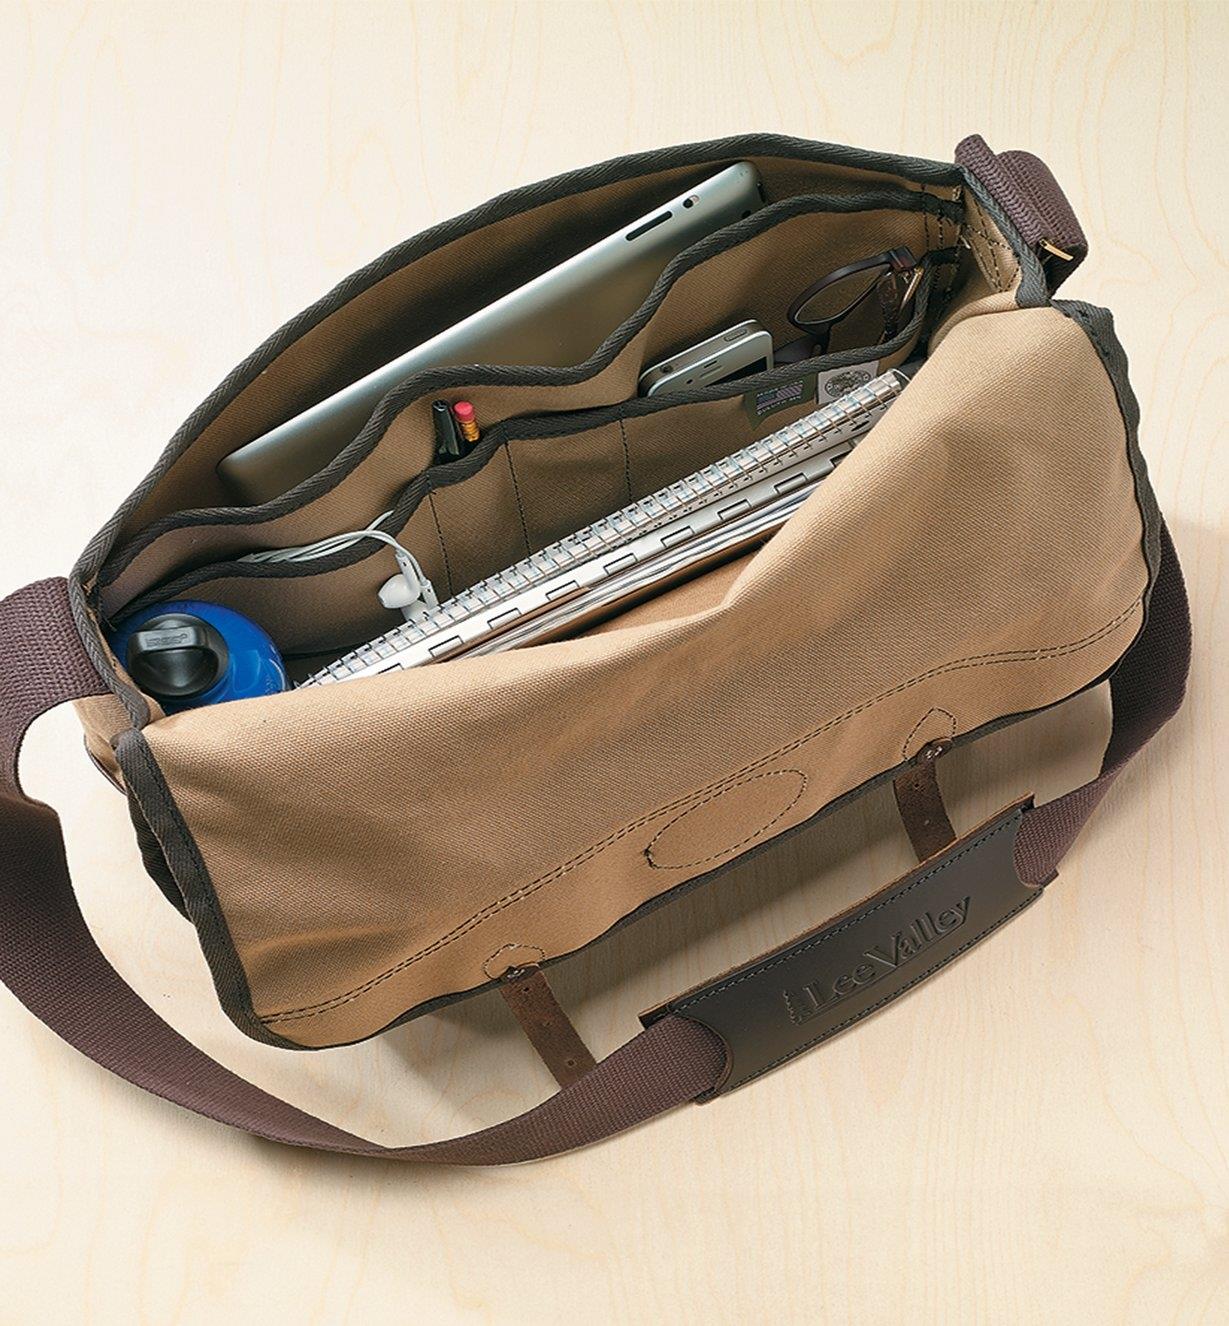 Lee Valley Shoulder Bag sitting open, with various pockets holding a laptop, a water bottle, pens, notebooks, a phone and glasses